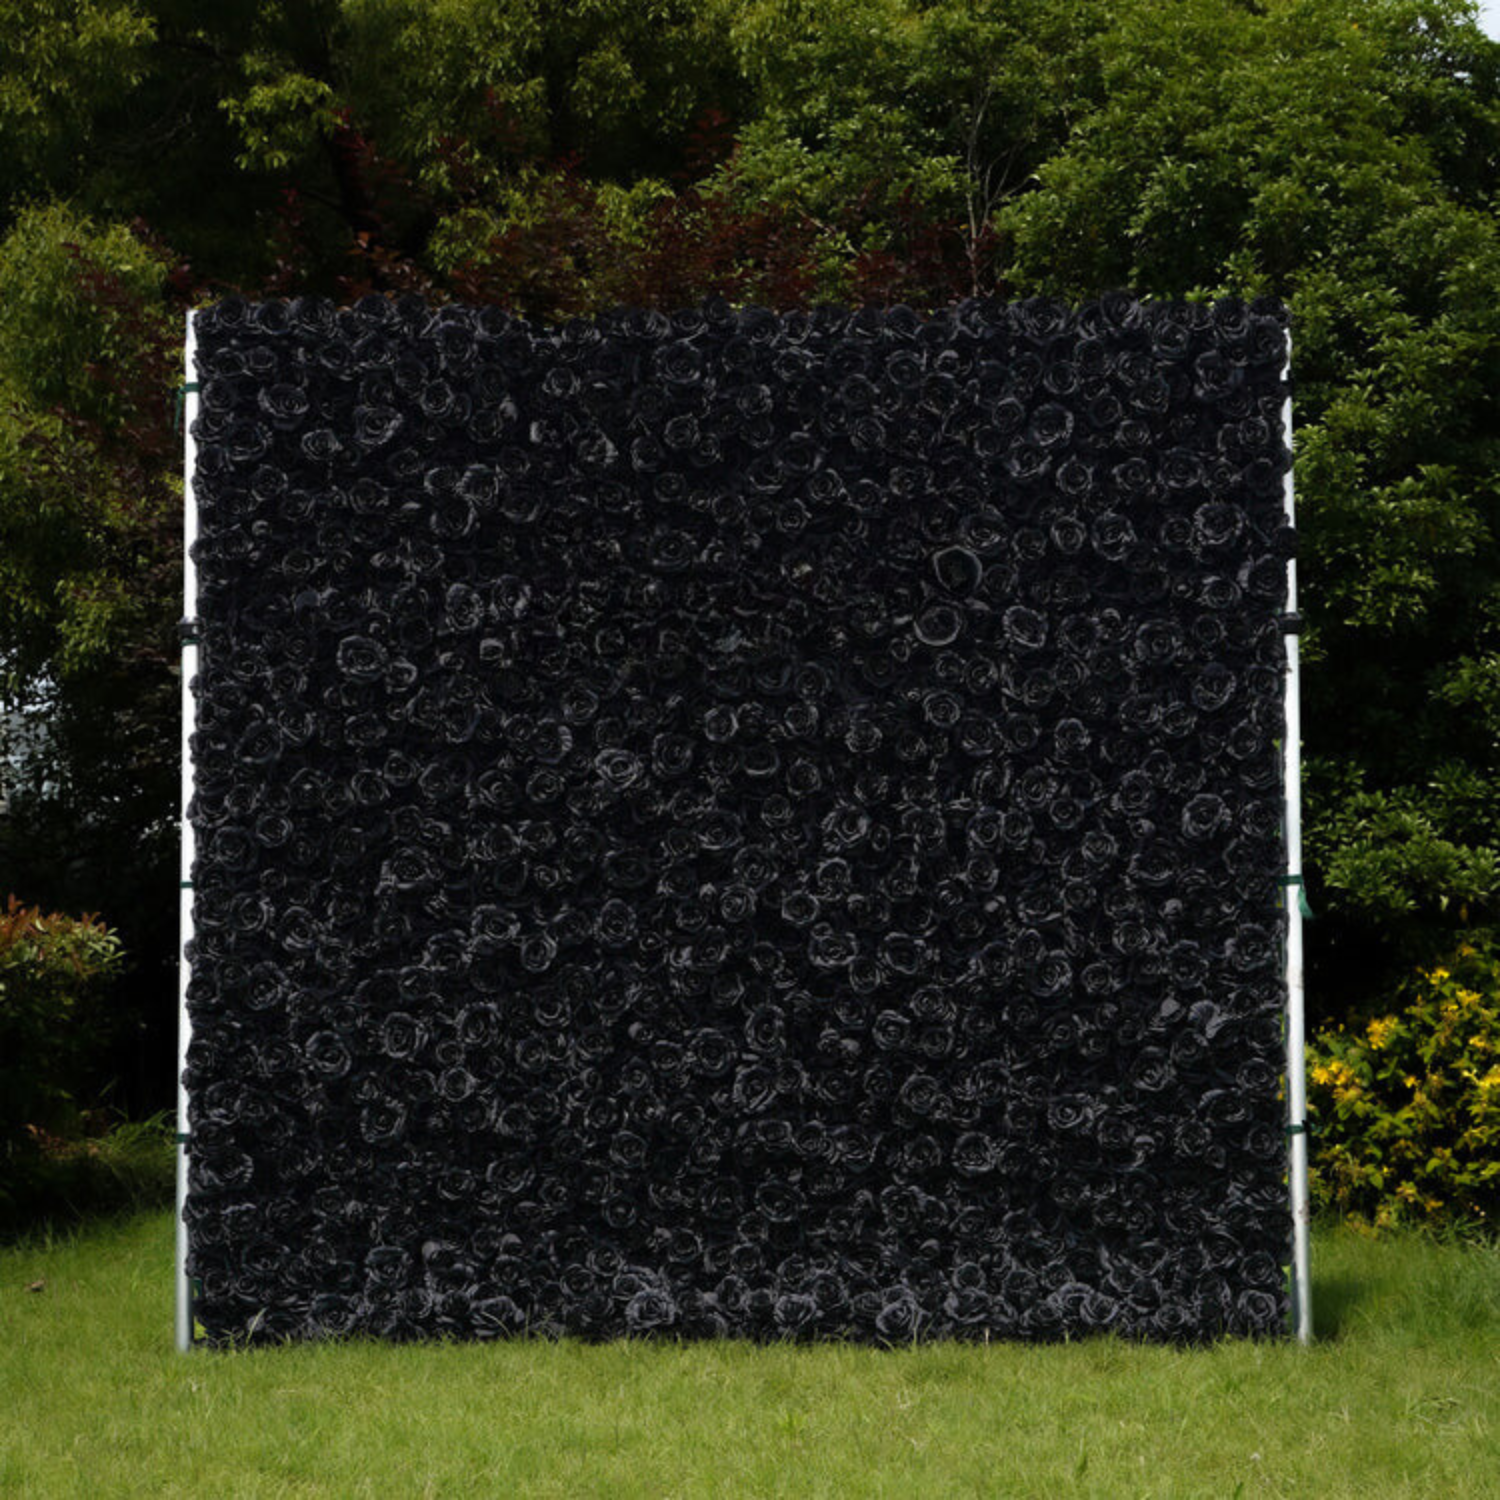 Black Rose Wall - Riverside Flower Wall Rental - Perfect Capture Booth | Photo Booth Rental.png